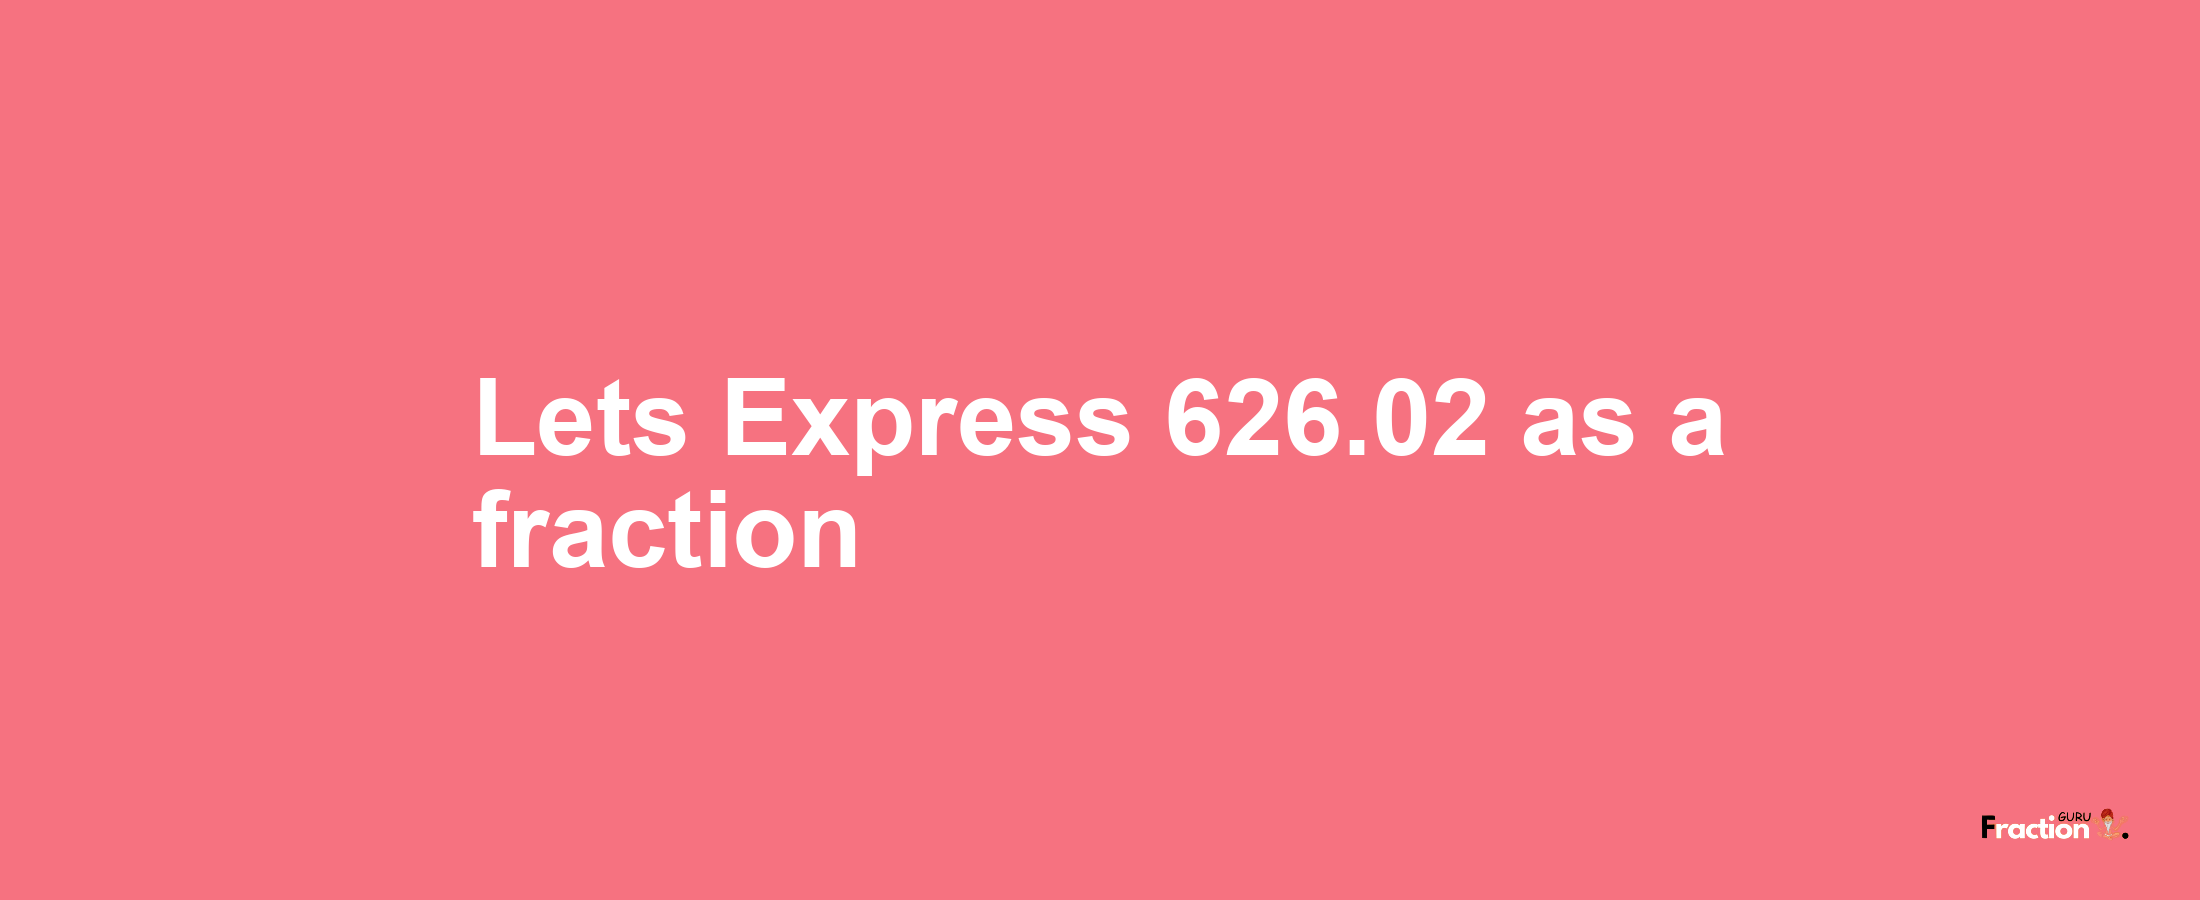 Lets Express 626.02 as afraction